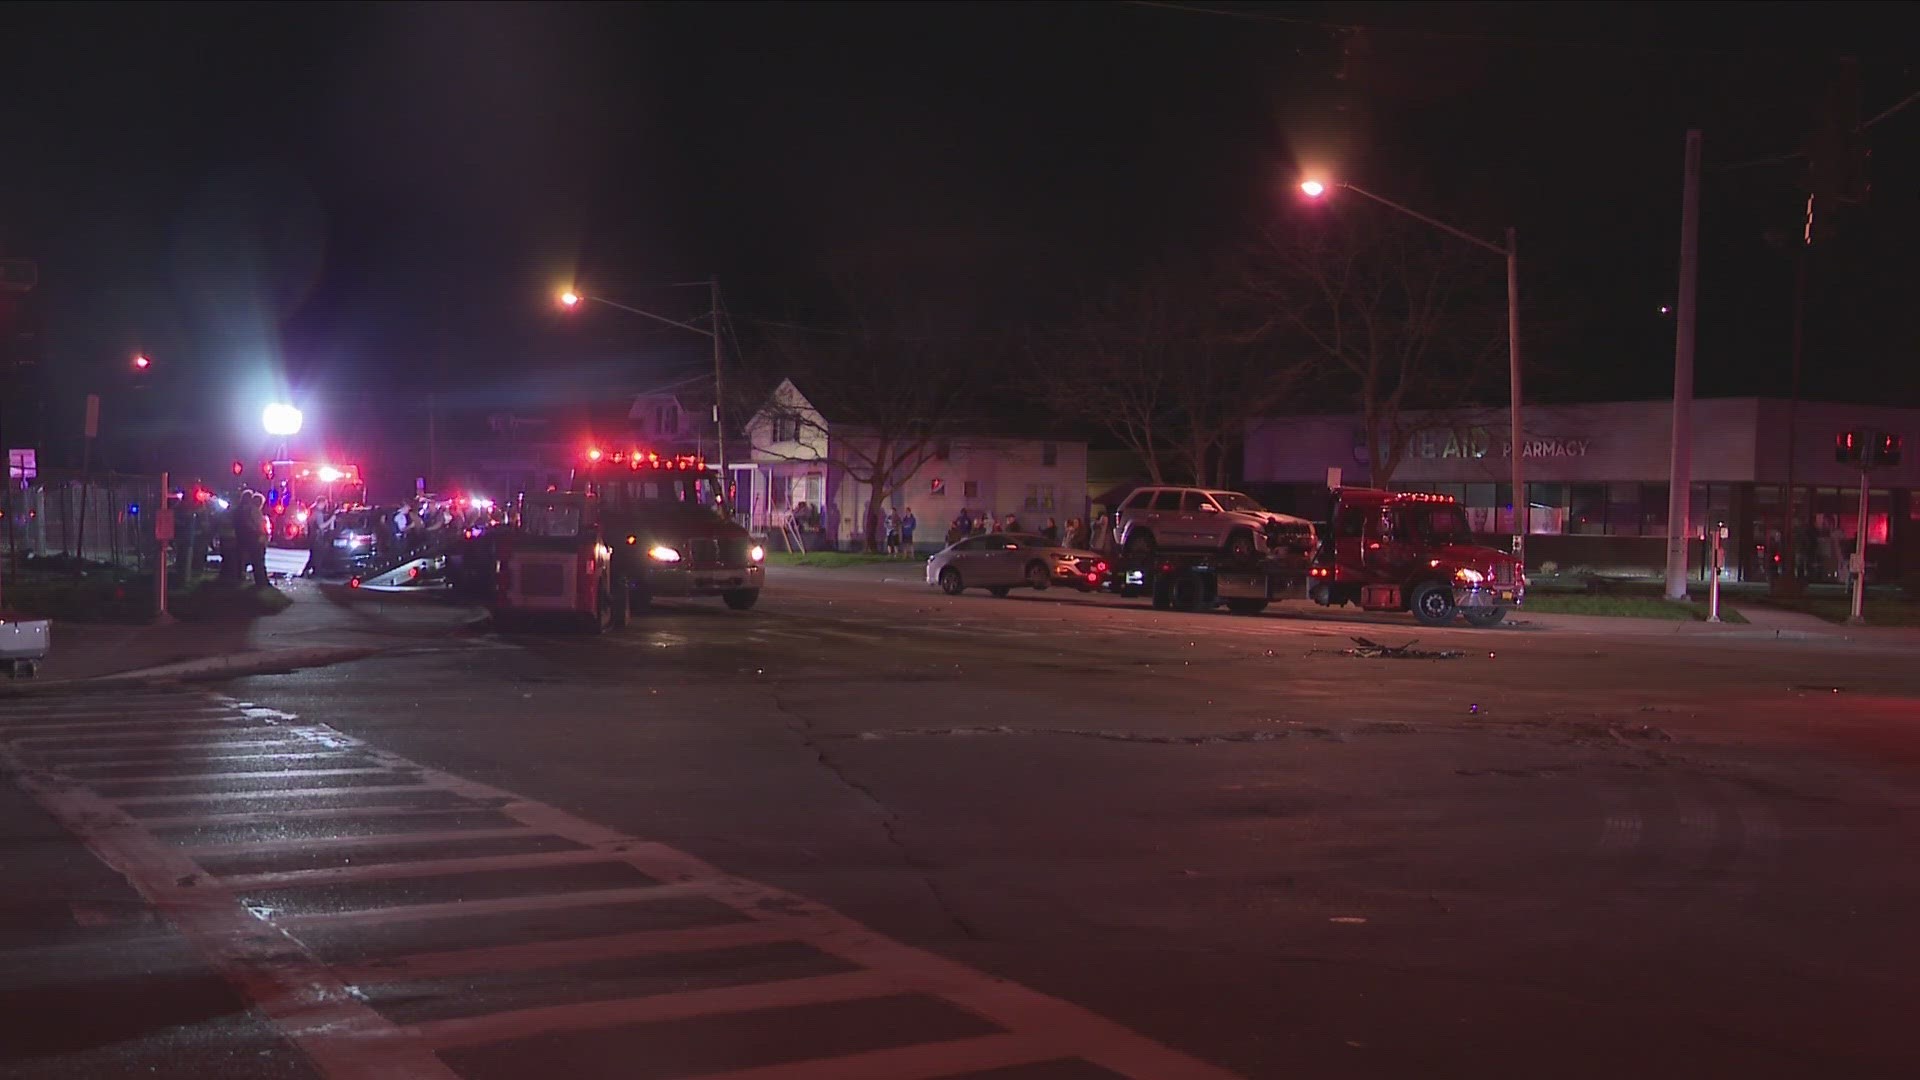 THE DRIVER WAS allegedly FLEEING  POLICE WHEN he CRASHED AT THE INTERSECTION OF WILLIAM AND HARLEM... it caused A MAJOR PILE UP WITH FOUR OTHER CARS.